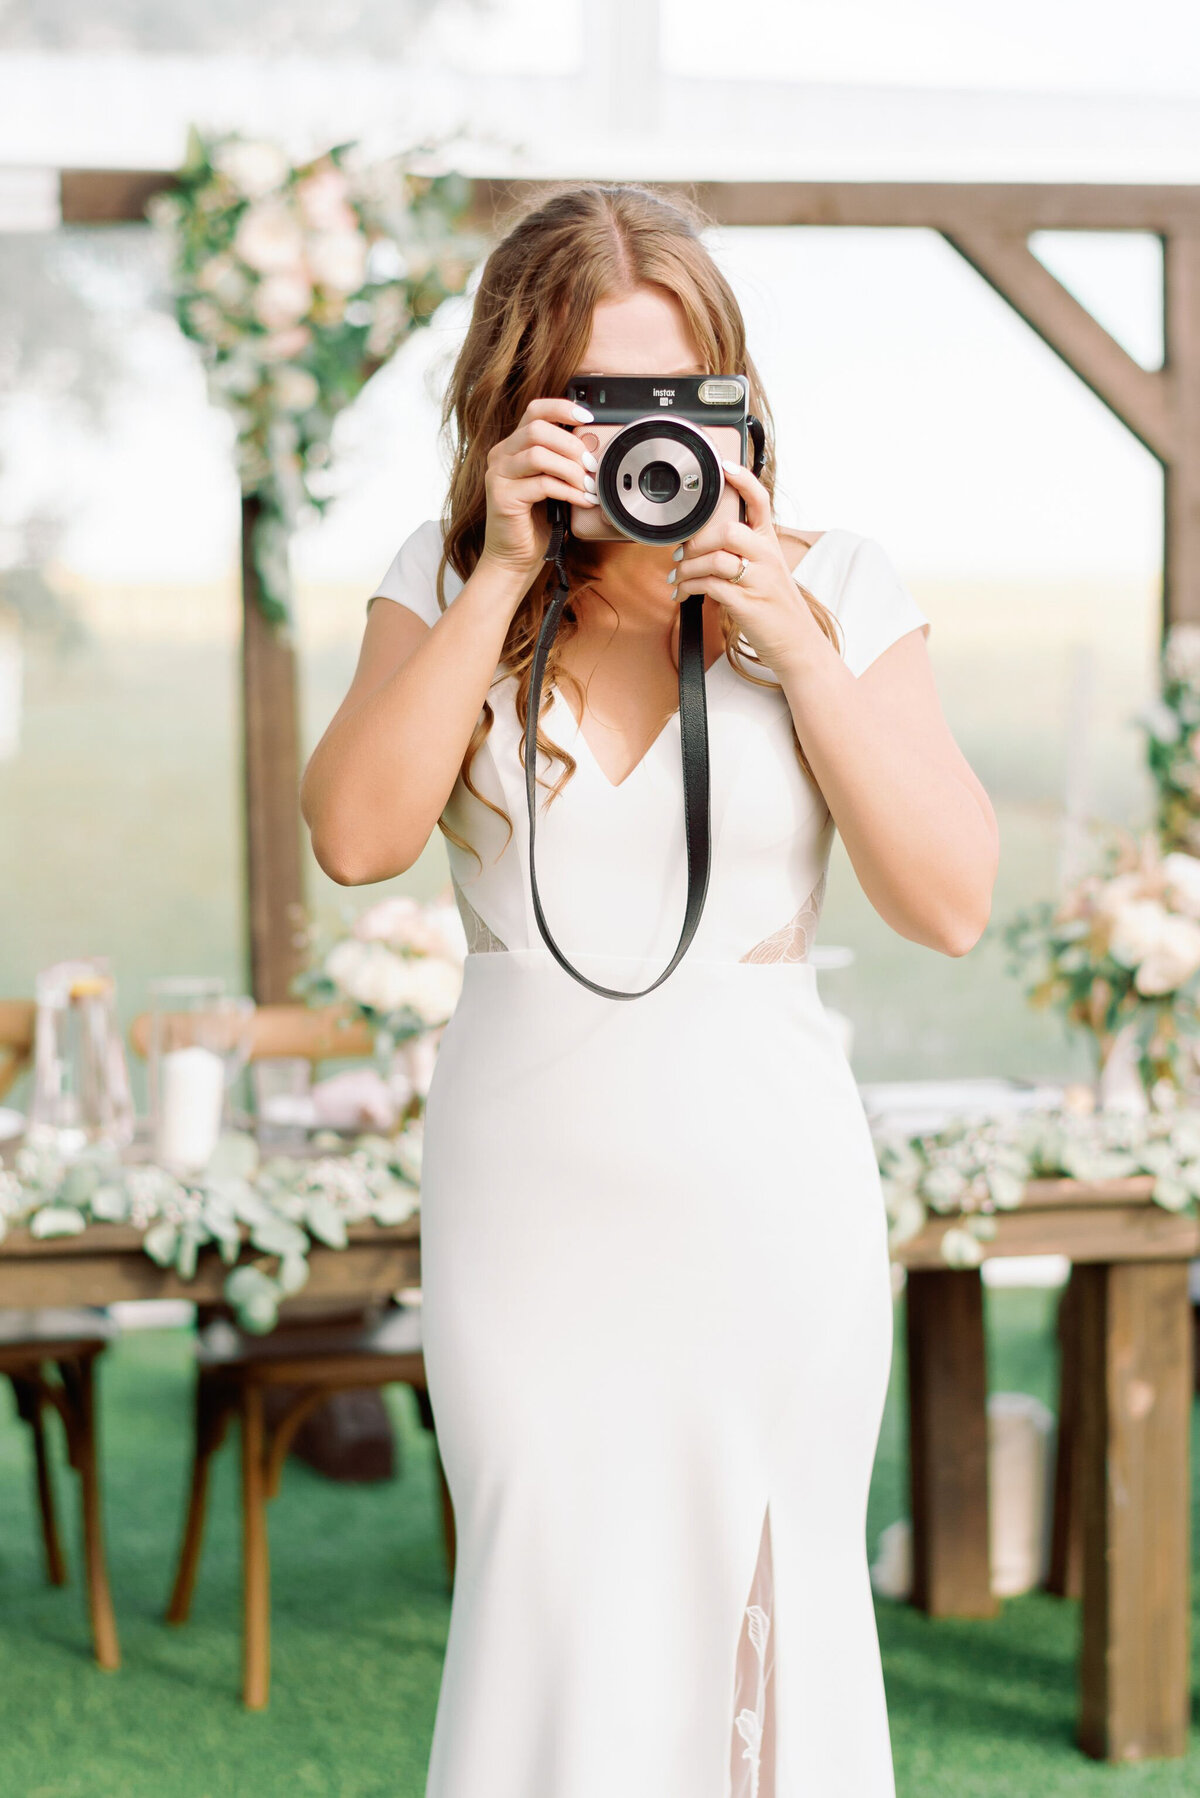 Fun bride taking photo with Polaroid camera, captured by Kaity Body Photography, elegant film inspired wedding photographer in Calgary, Alberta. Featured on the Bronte Bride Vendor Guide